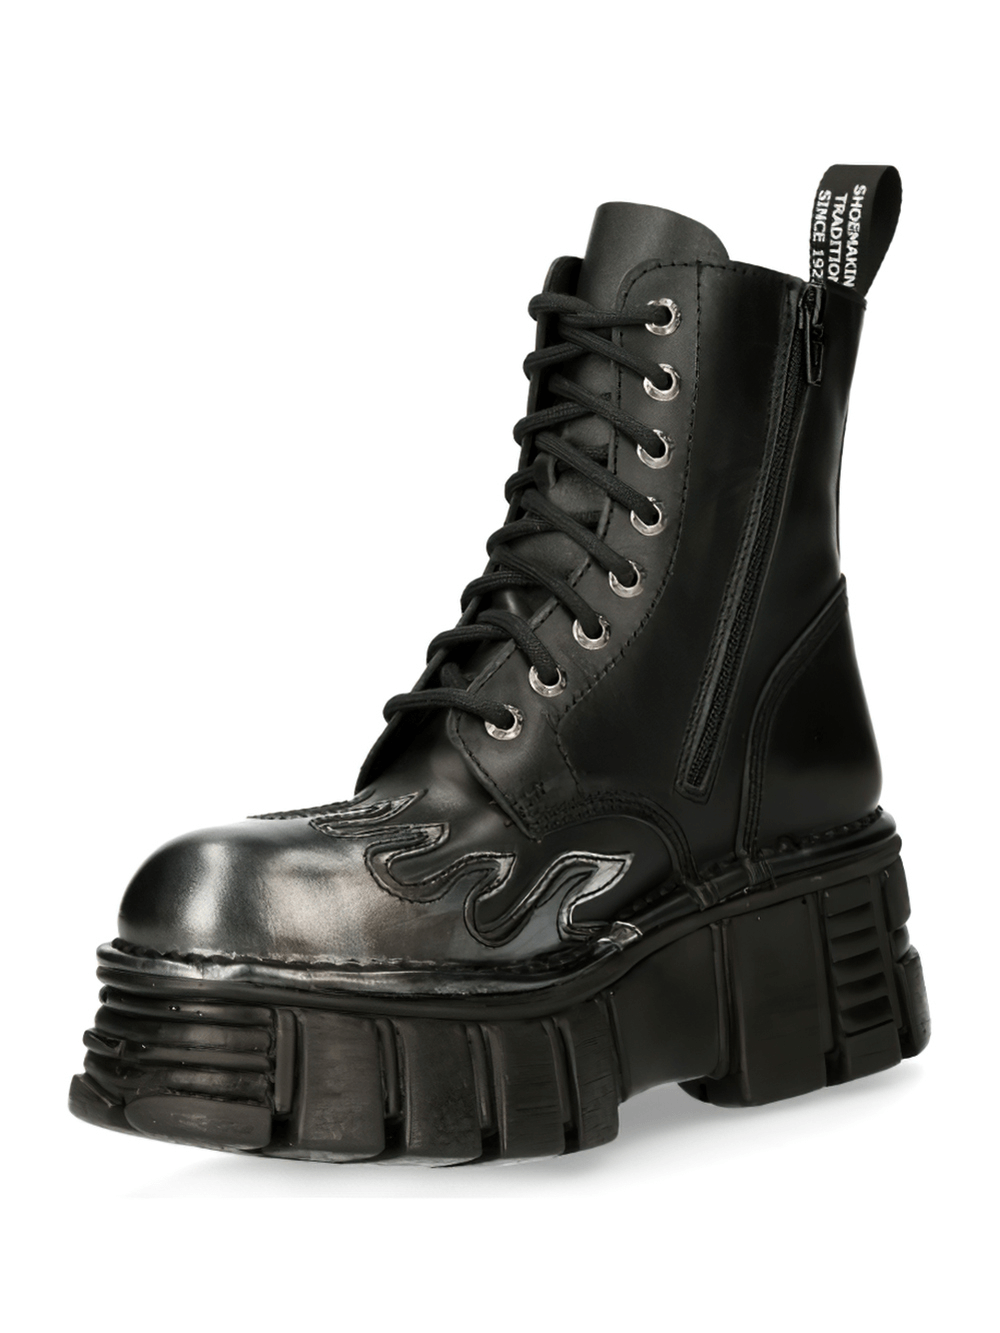 NEW ROCK Military-Style Ankle Boots with Metal Accents